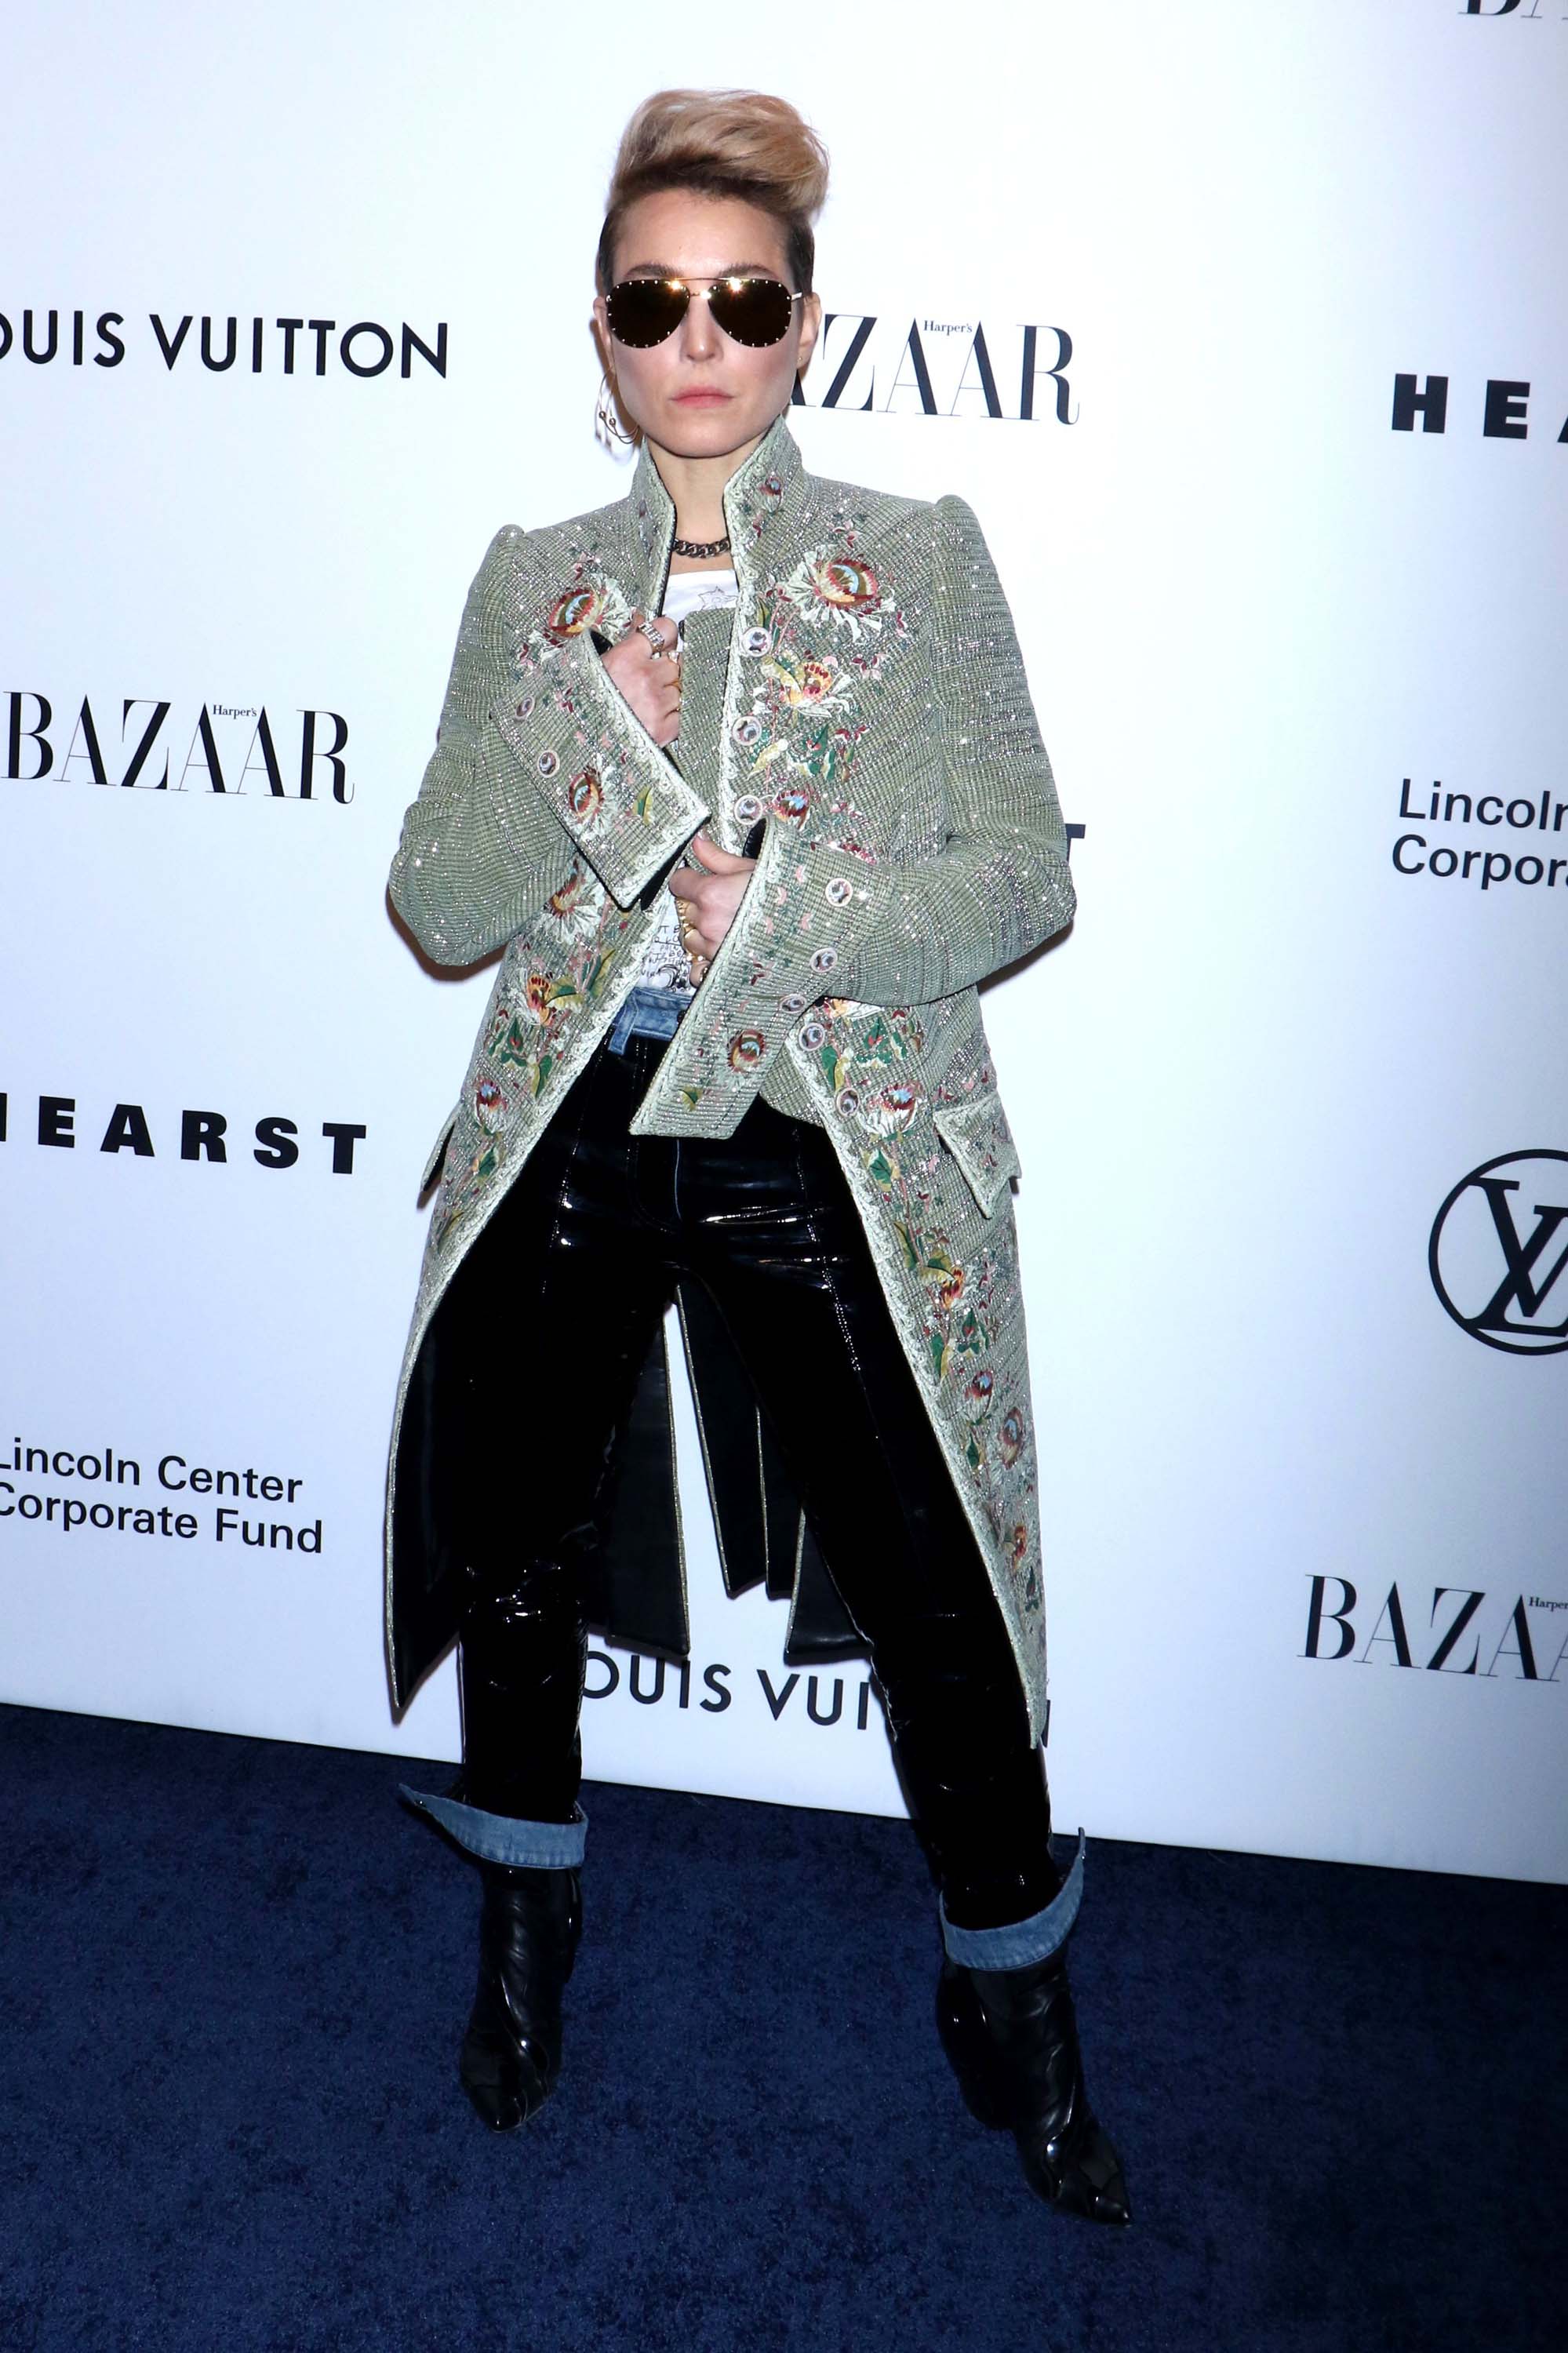 Noomi Rapace attends Lincoln Center Corporate Fund Gala